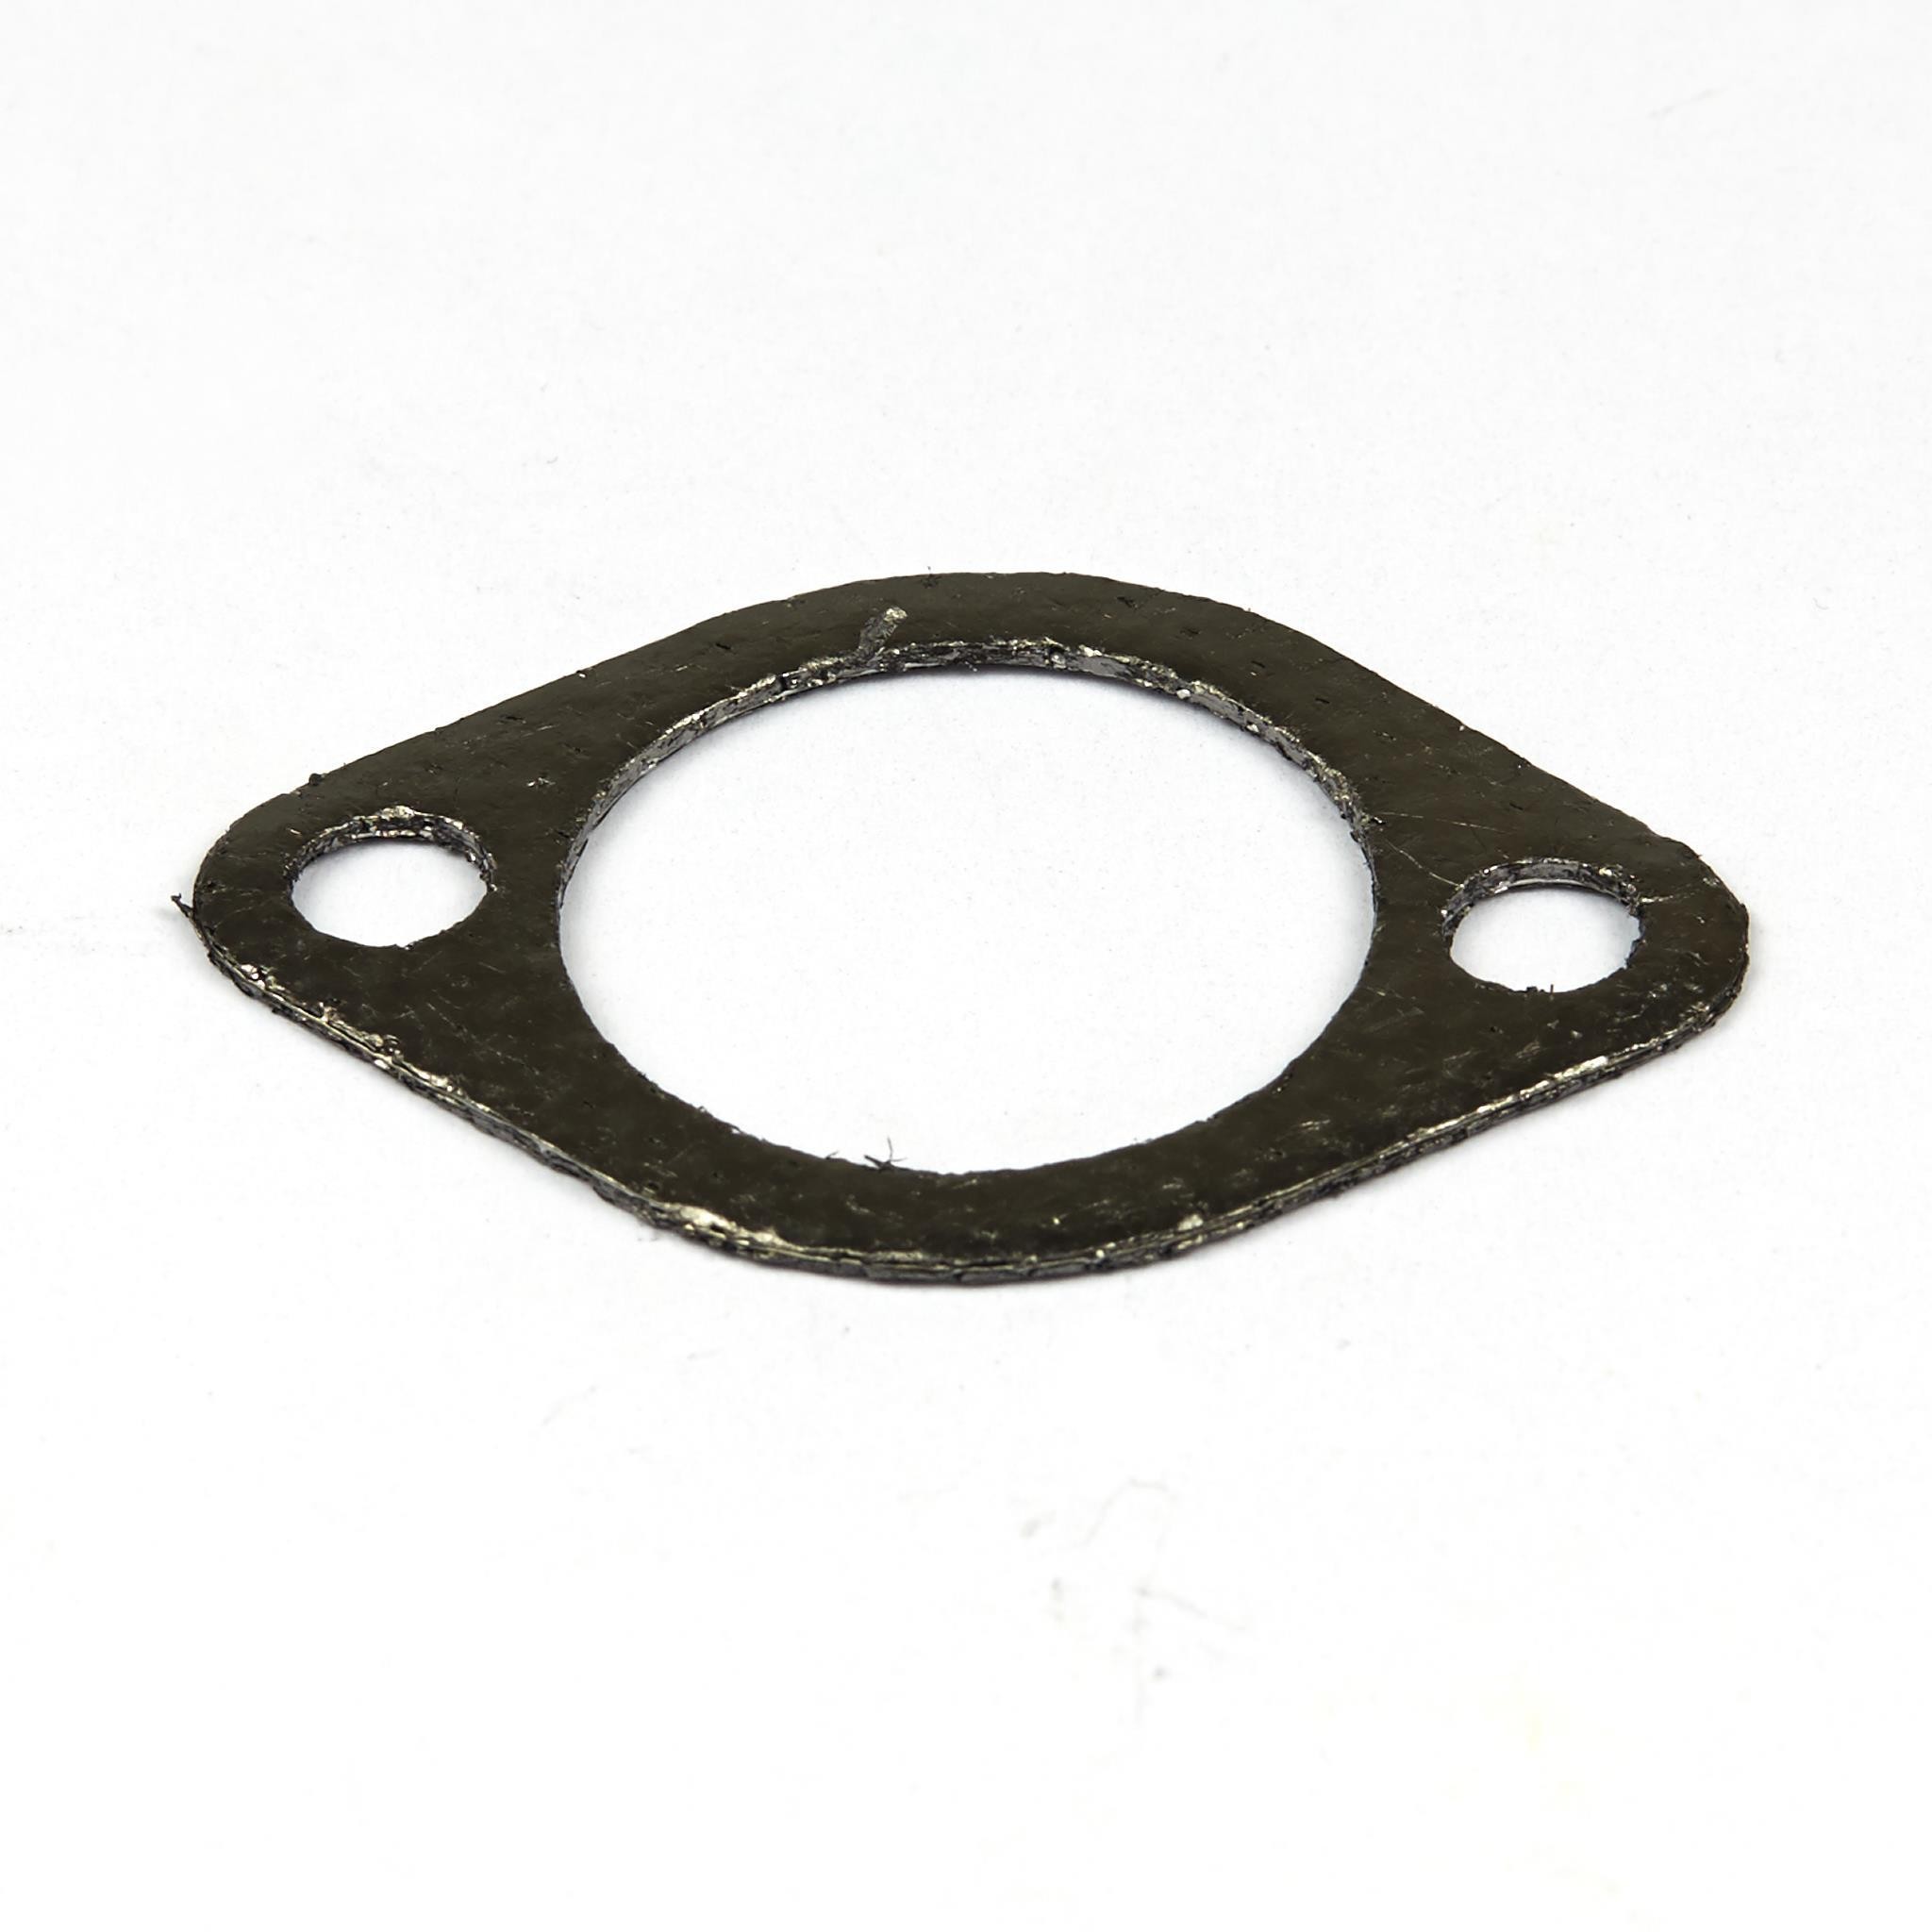 17.5 Briggs and Stratton Parts Exhaust Gasket Of 17.5 Briggs and Stratton Parts